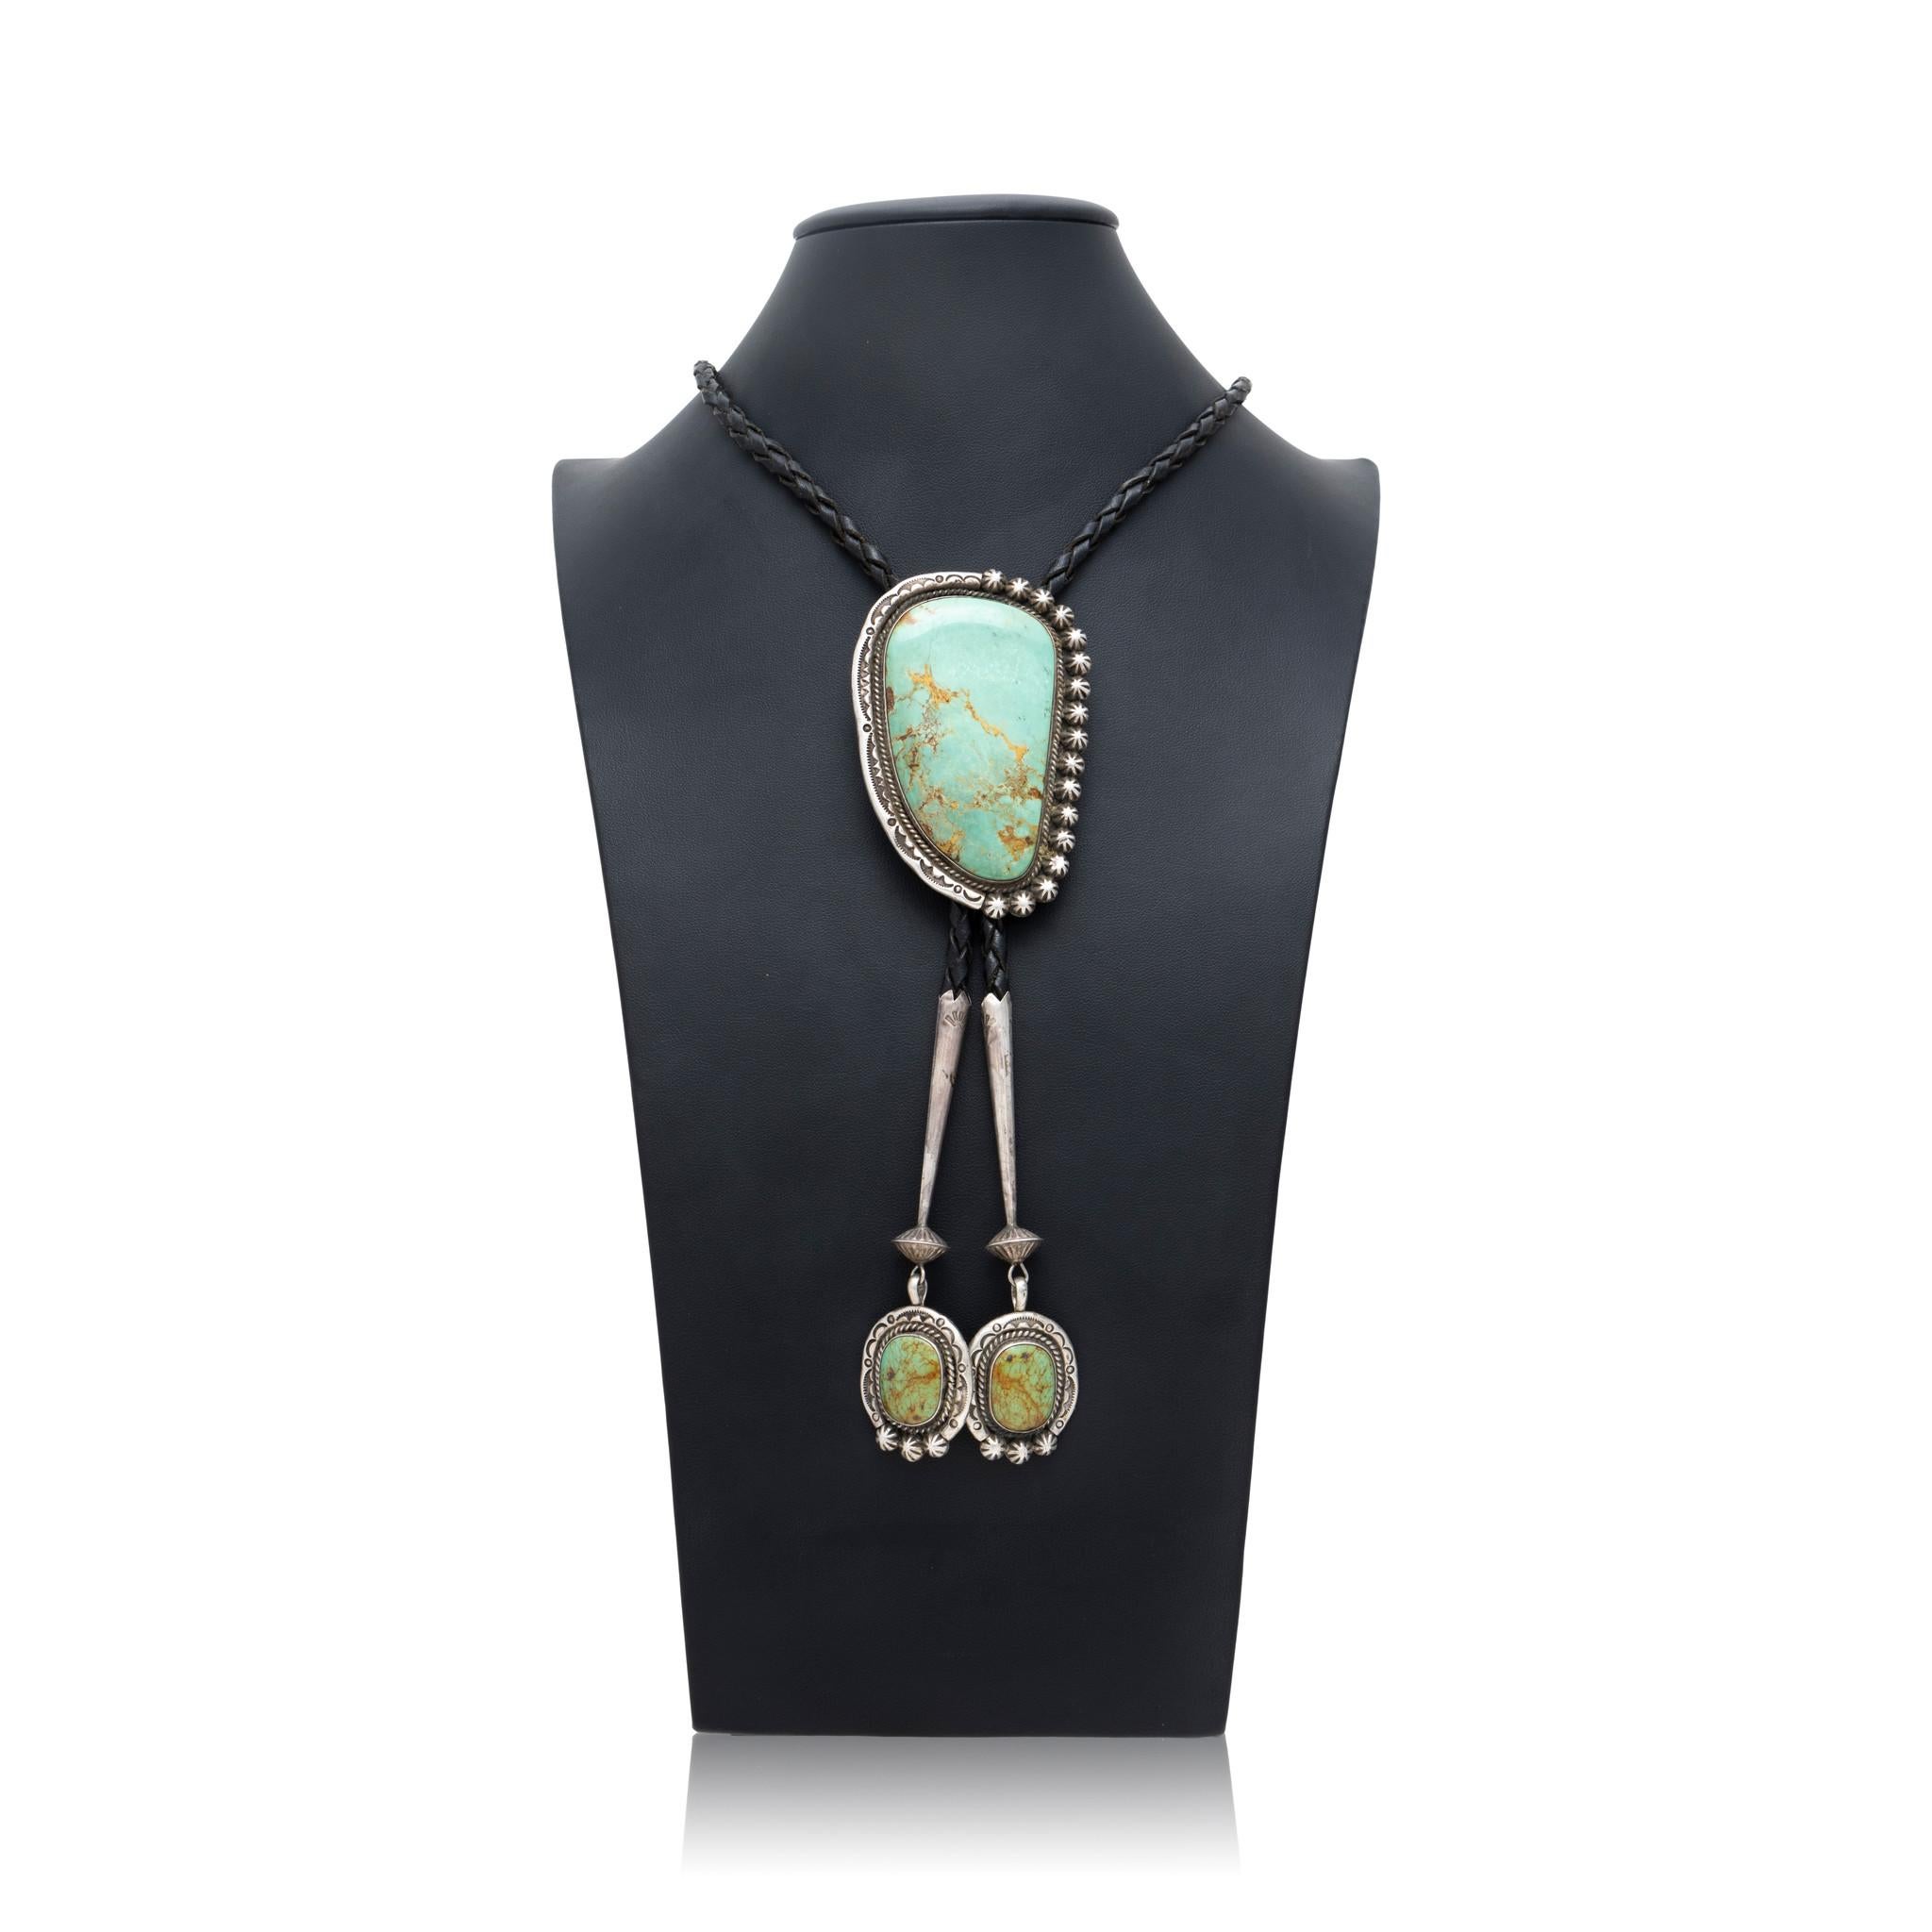 Native American Navajo Indian sterling silver and Royston turquoise bolo tie by silversmith K. Tareky. This exceptional piece features large natural, untreated center stone set in classic sterling twisted rope border with hand stamped palmettes and